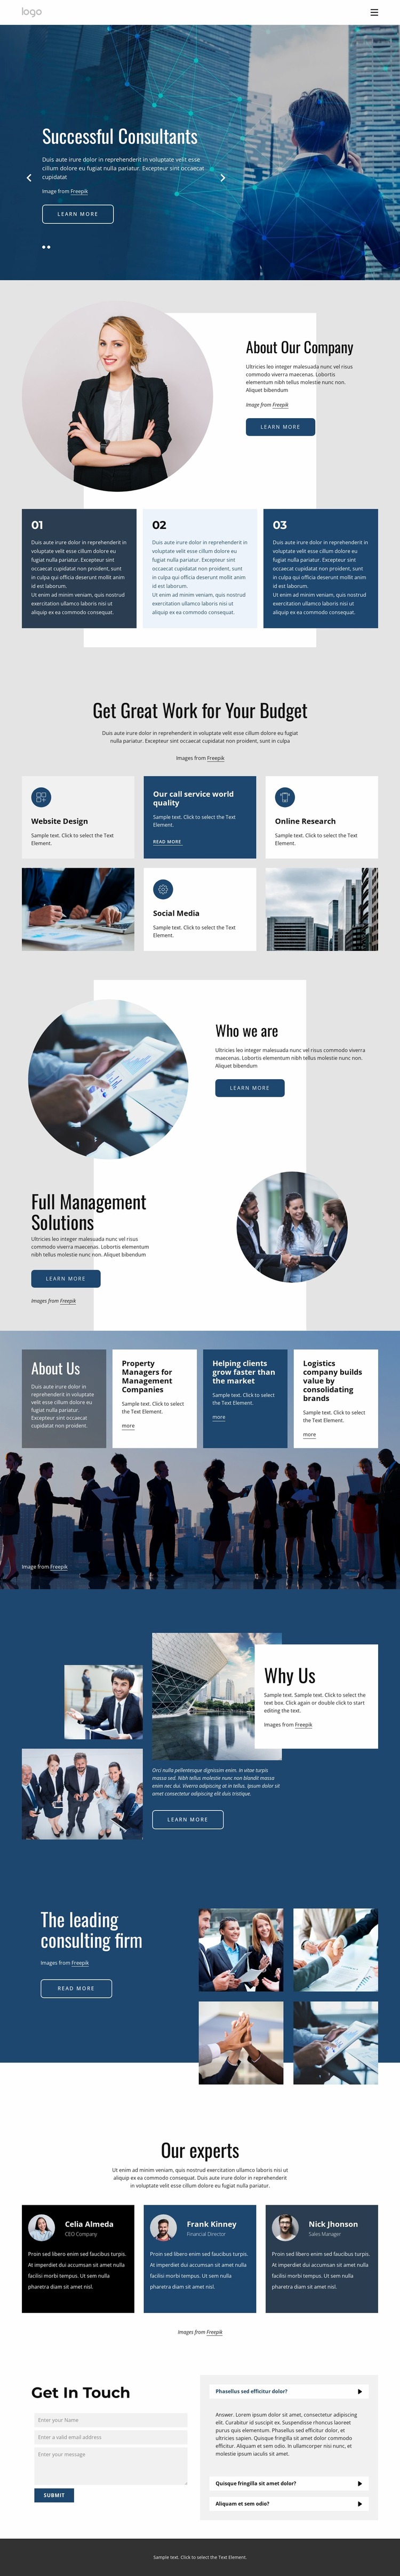 We offer tailored consulting services WordPress Website Builder